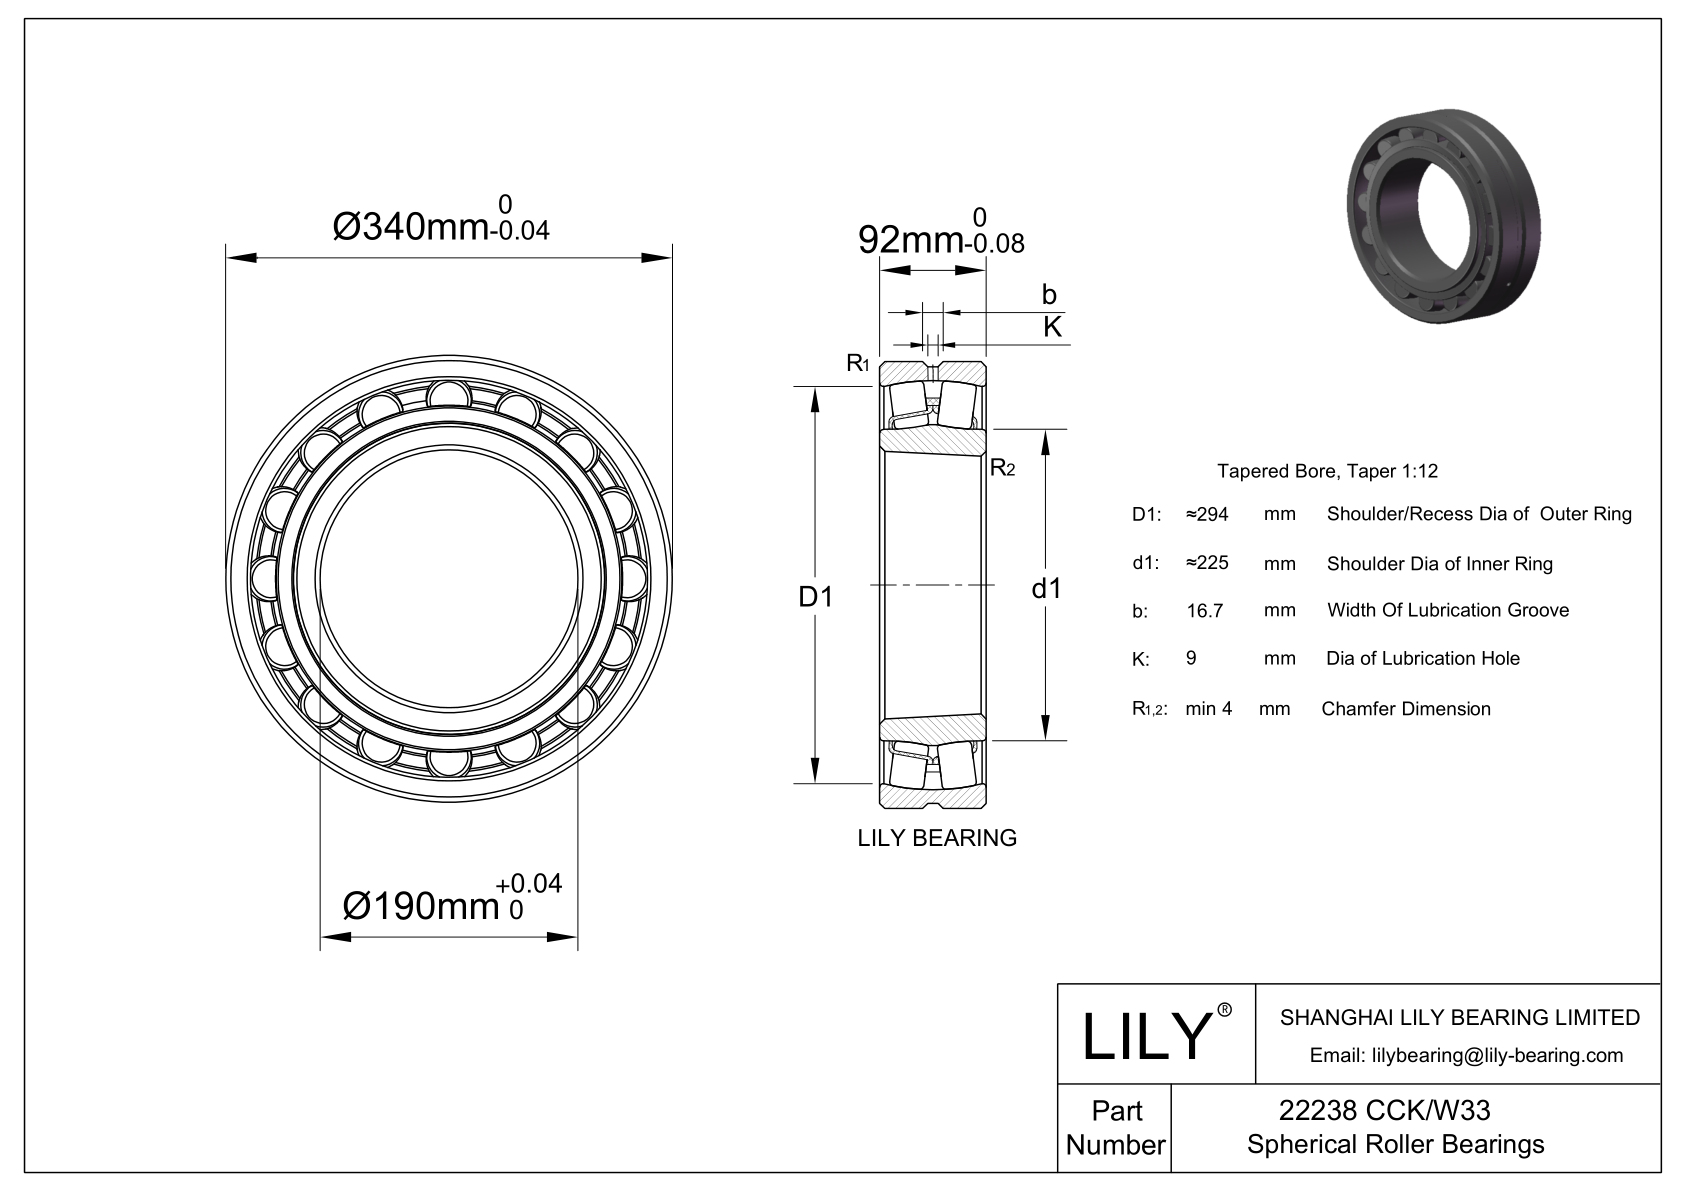 22238 CCK/W33 Double Row Spherical Roller Bearing cad drawing